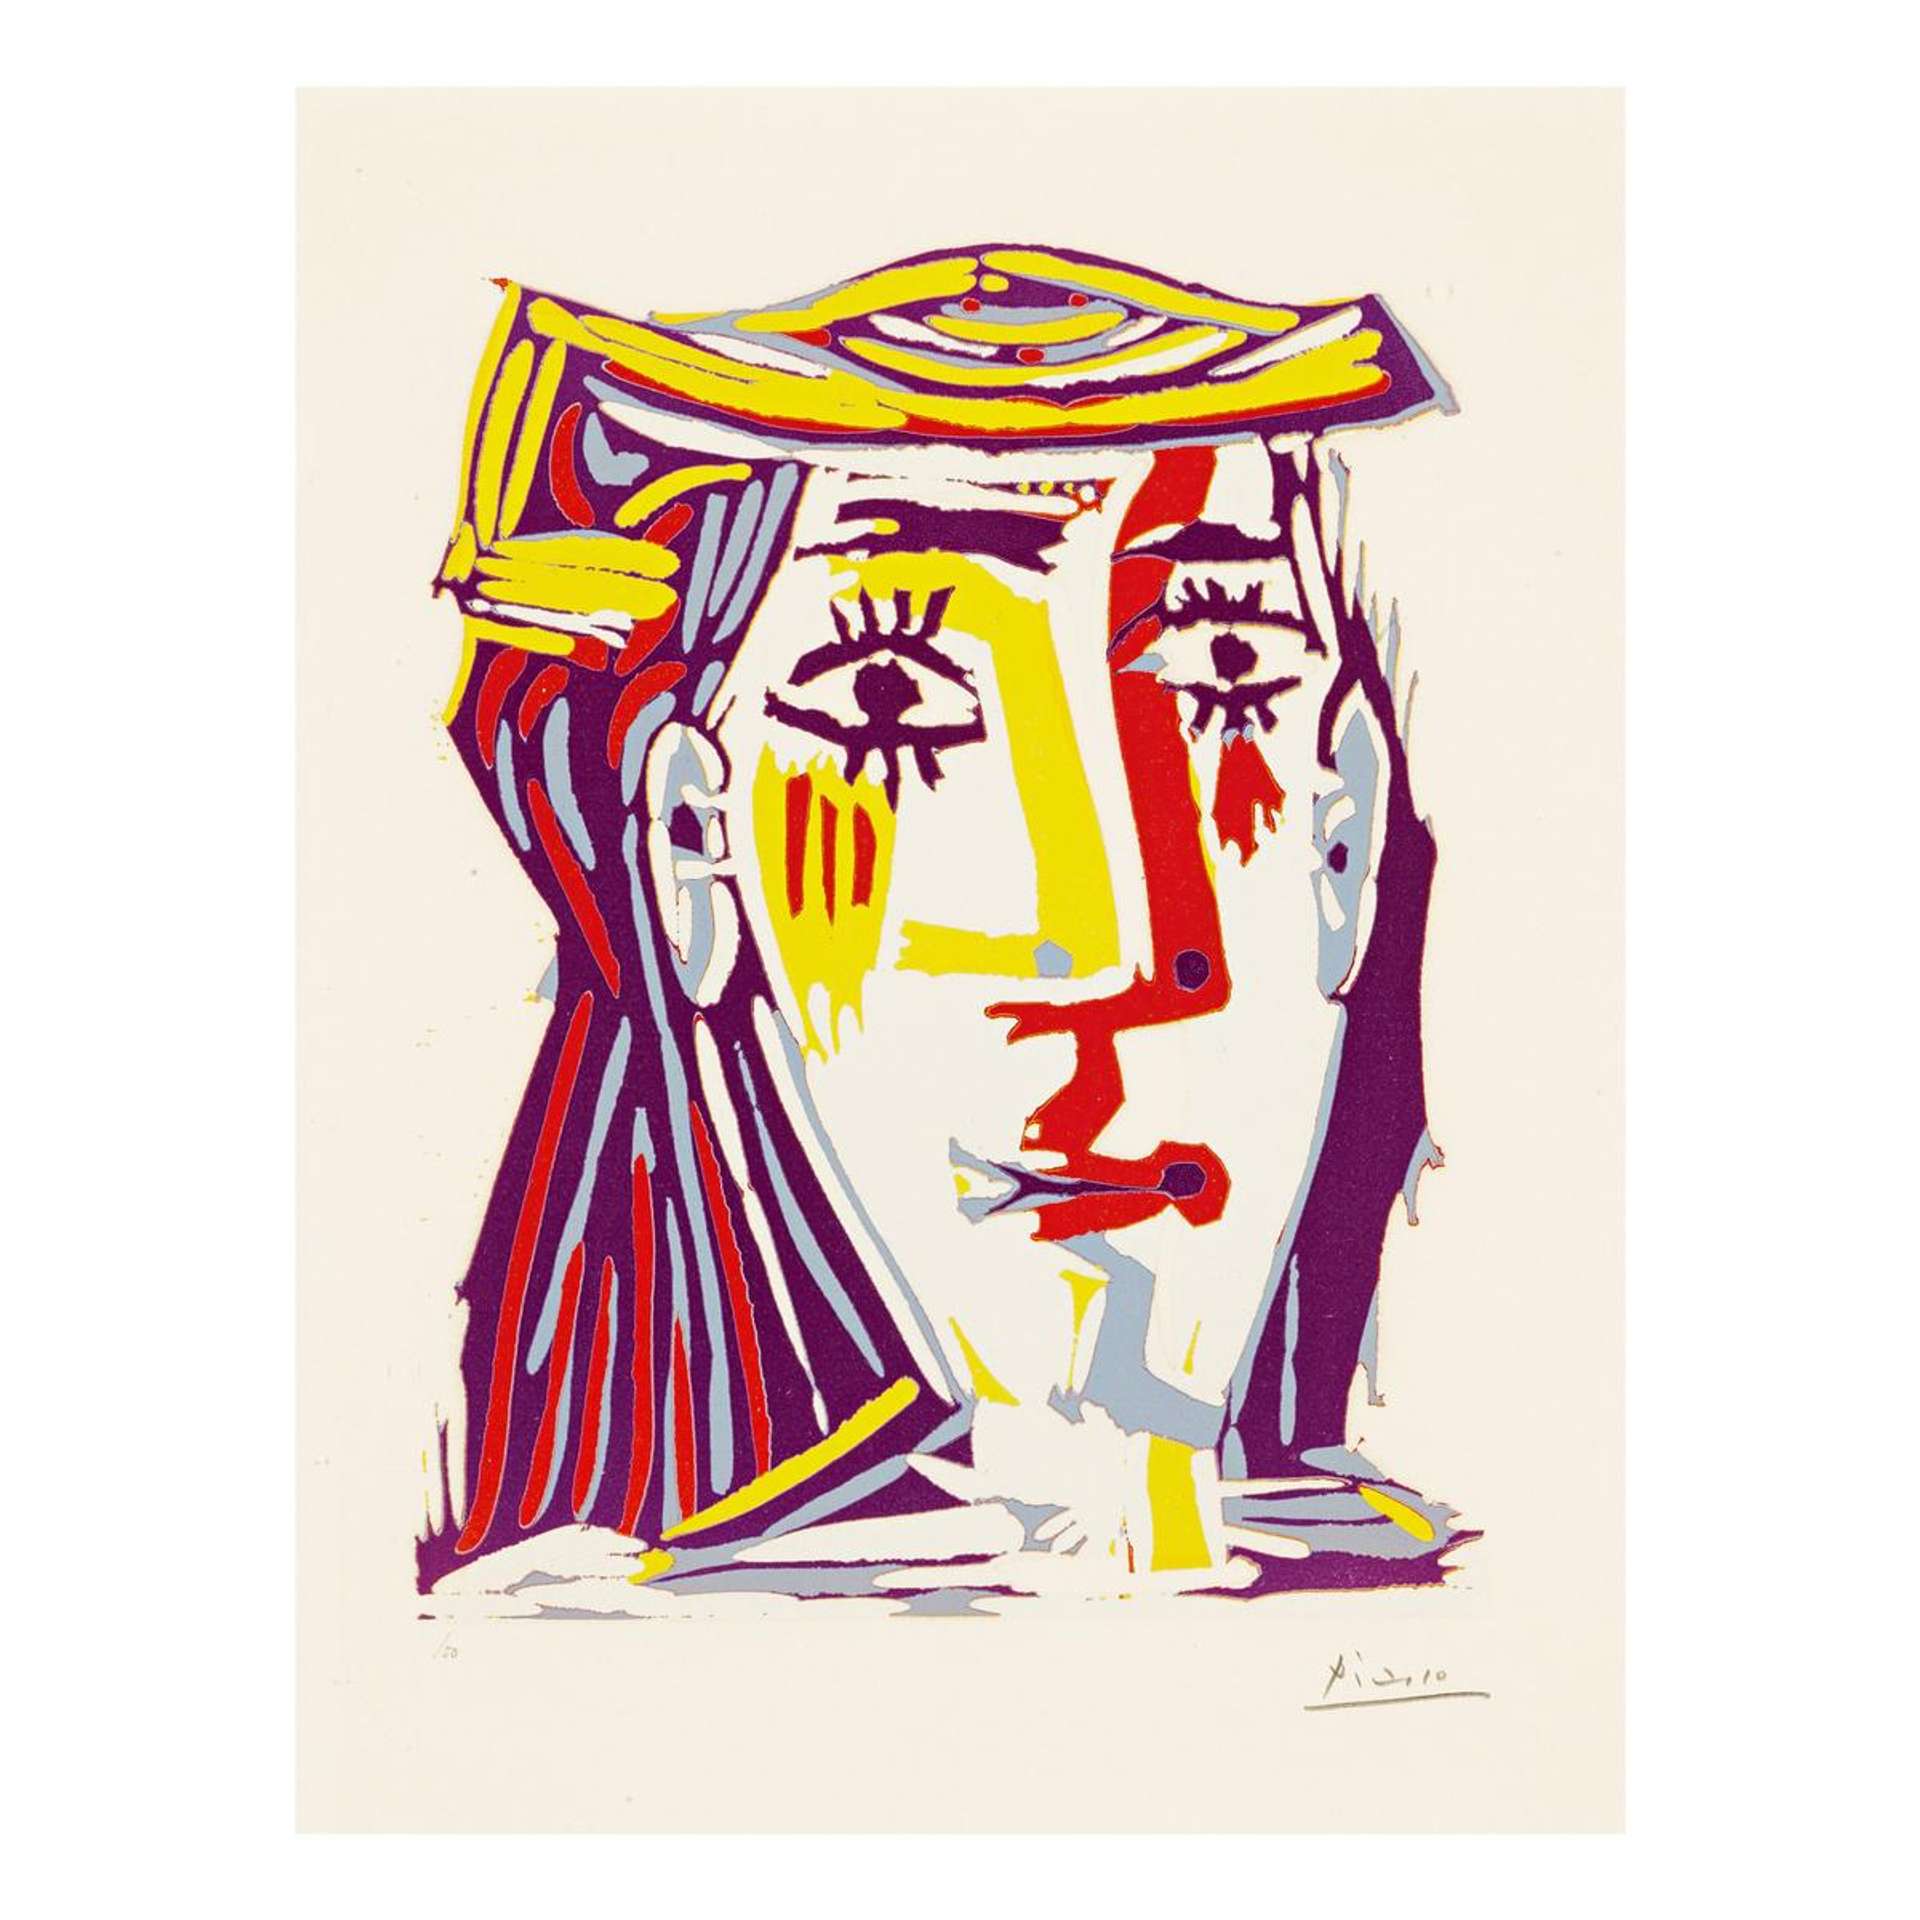 This print shows the face of Picasso's muse, depicted in bright colours and abstracted forms.